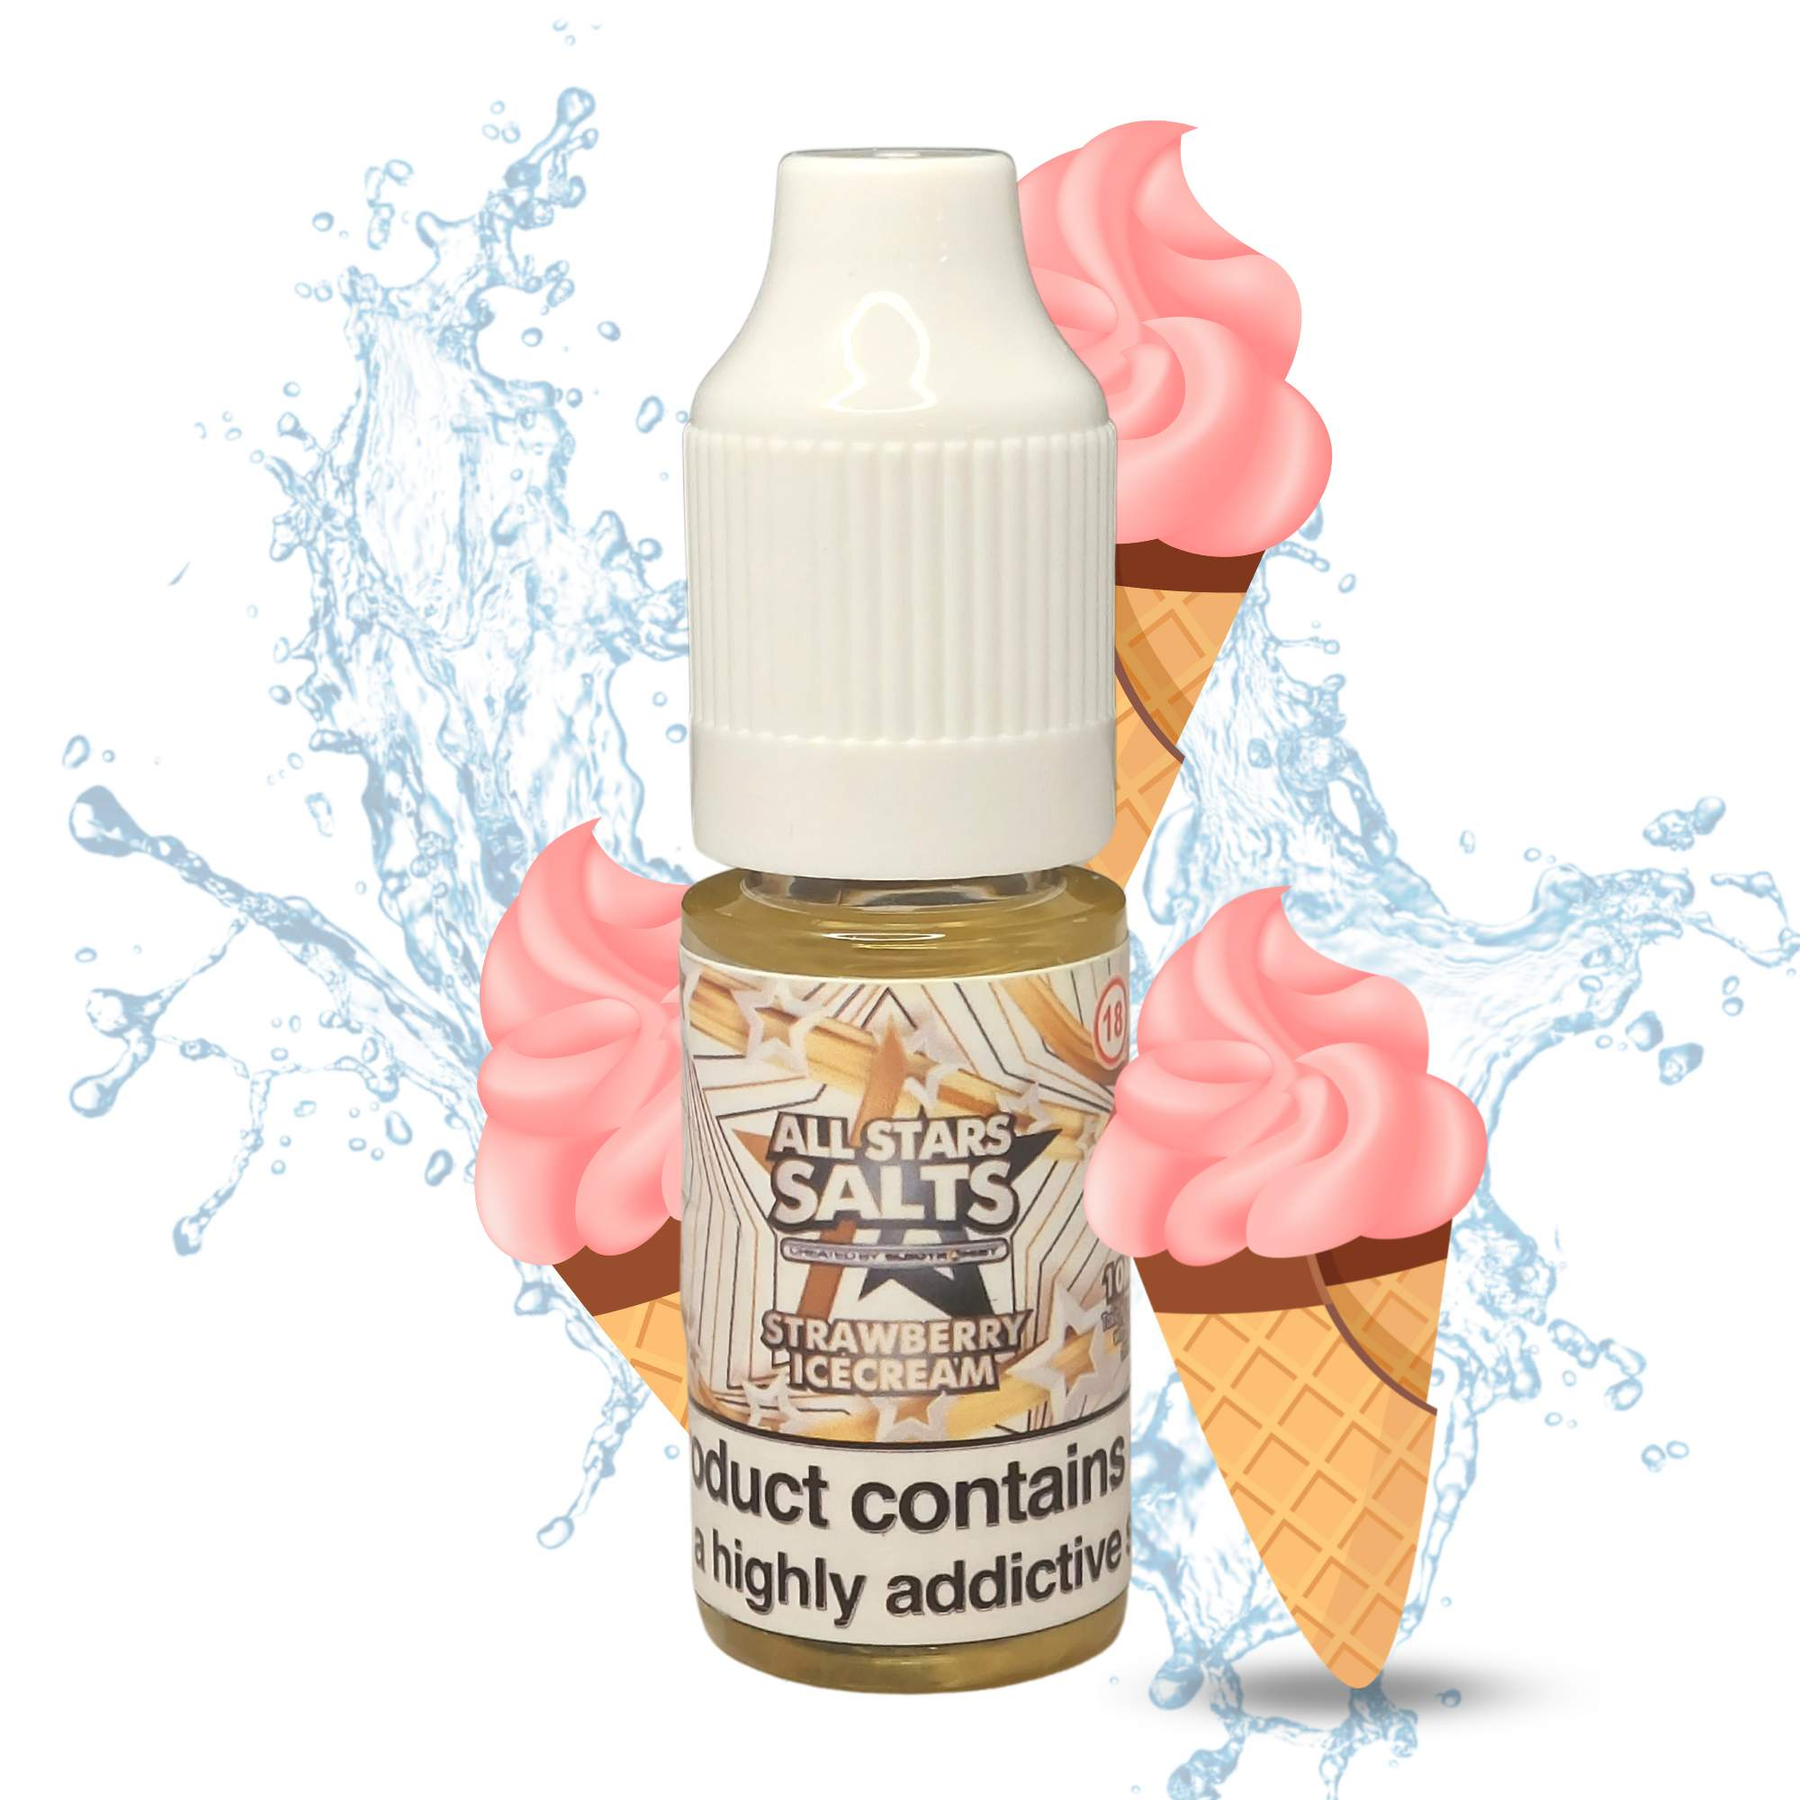 All Stars Salts from the vape brand you can trust, Electromist. Get your taste buds ready for a flavour sensation, Strawberry Ice Cream. Nicotine Content: 6mg/12mg/18mg Products may contain nicotine. For over 18s Only ejuice, vape pen, eliquid, e cigarette, 10ml, vaping, cloud, PG, VG, 60/40, vape liquid, Flavour, TPD